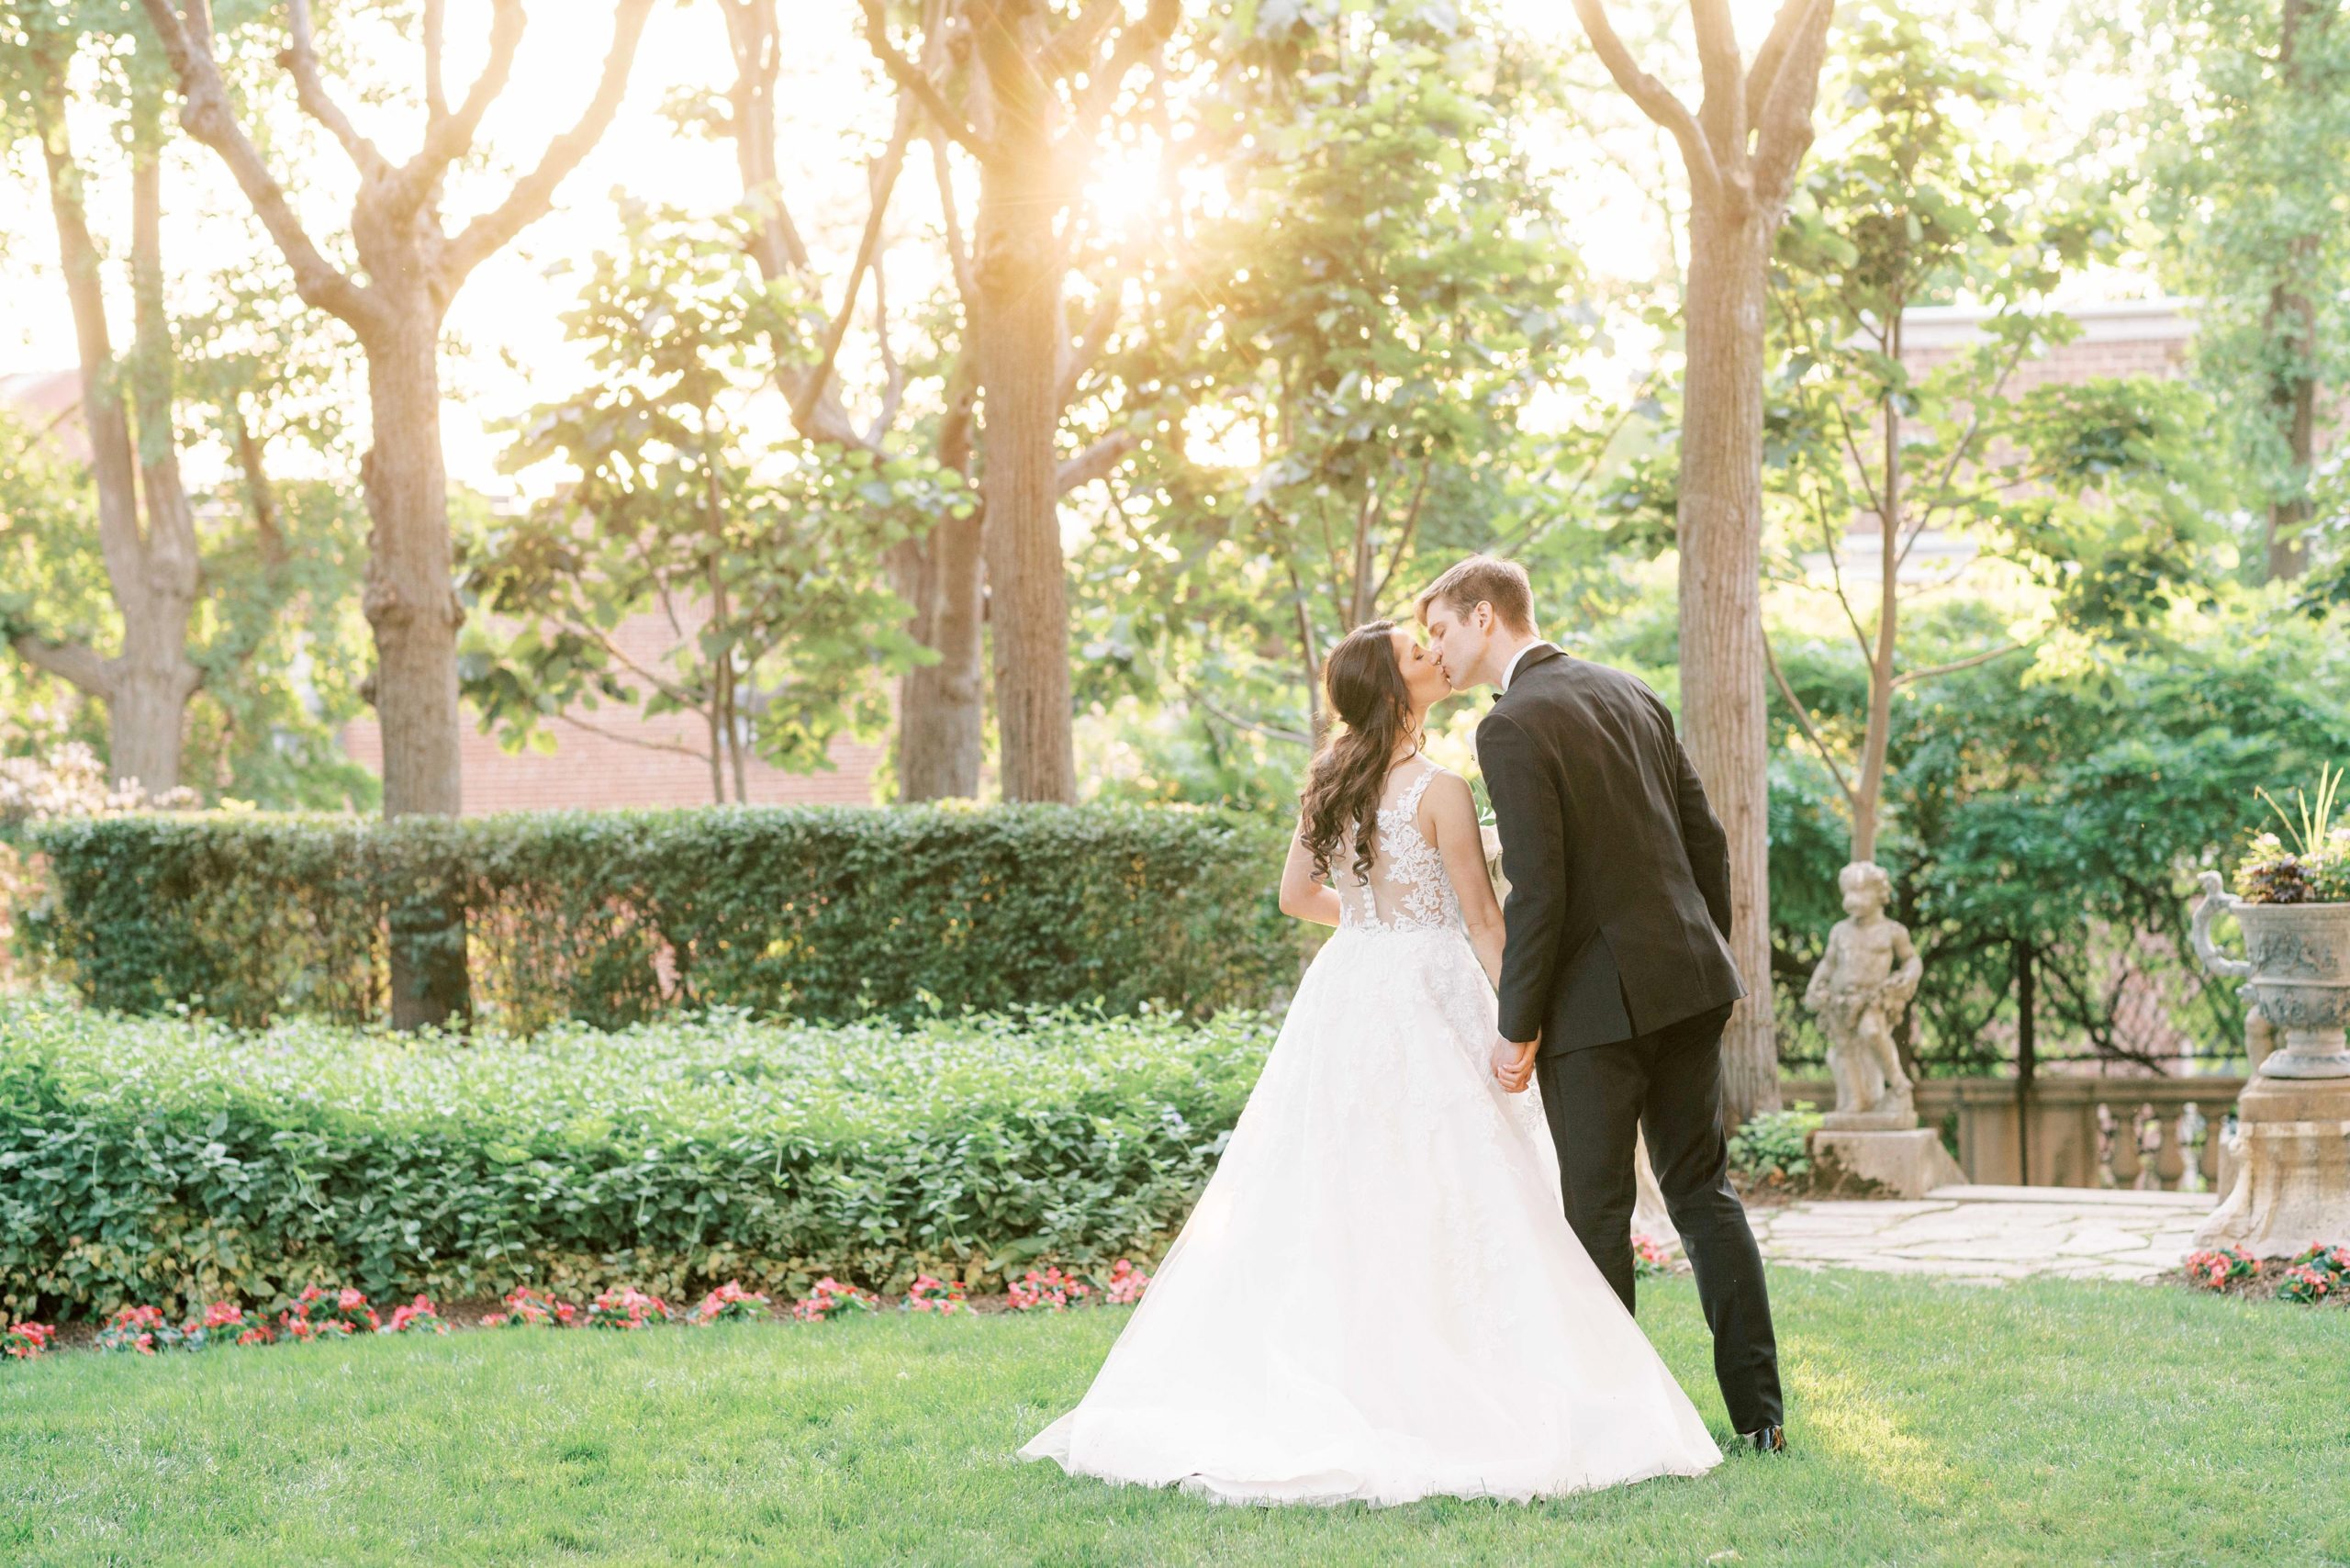 Couples portraits in the gardens at a Meridian House wedding in Washington, DC